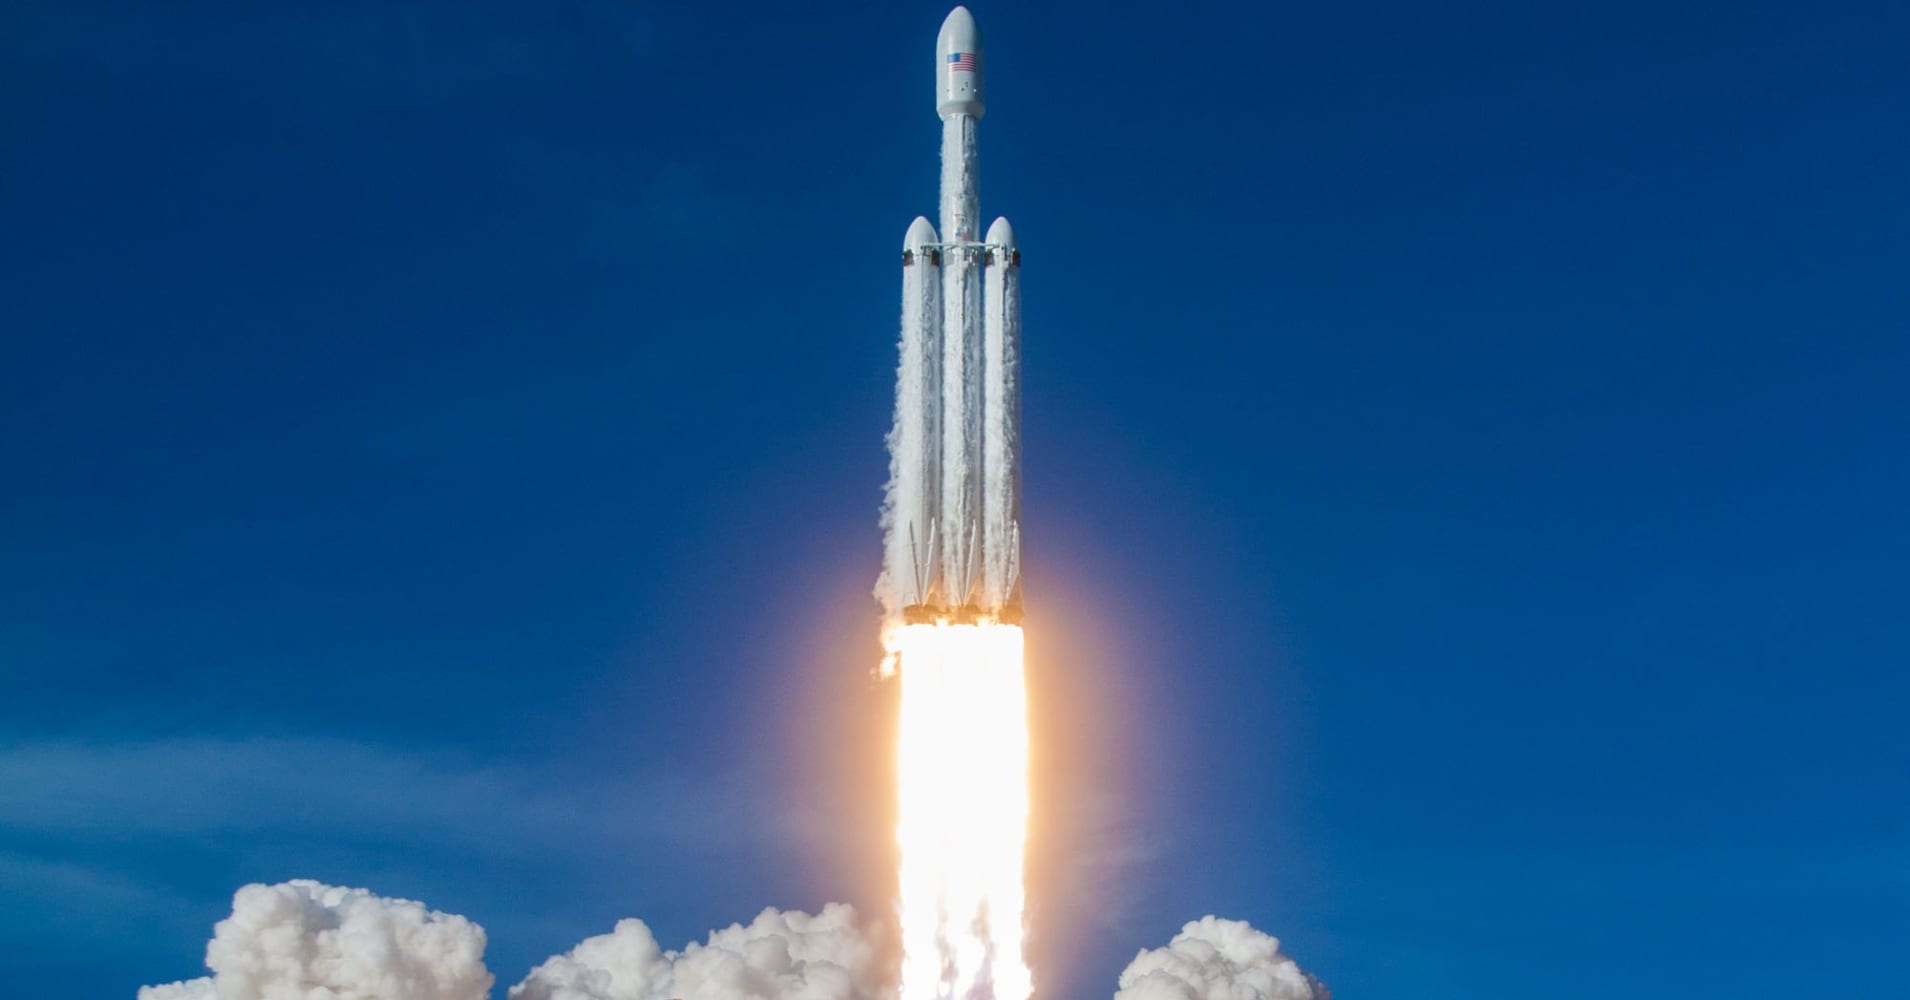 Livestream: Watch SpaceX Falcon Heavy rocket launch and landing1910 x 1000